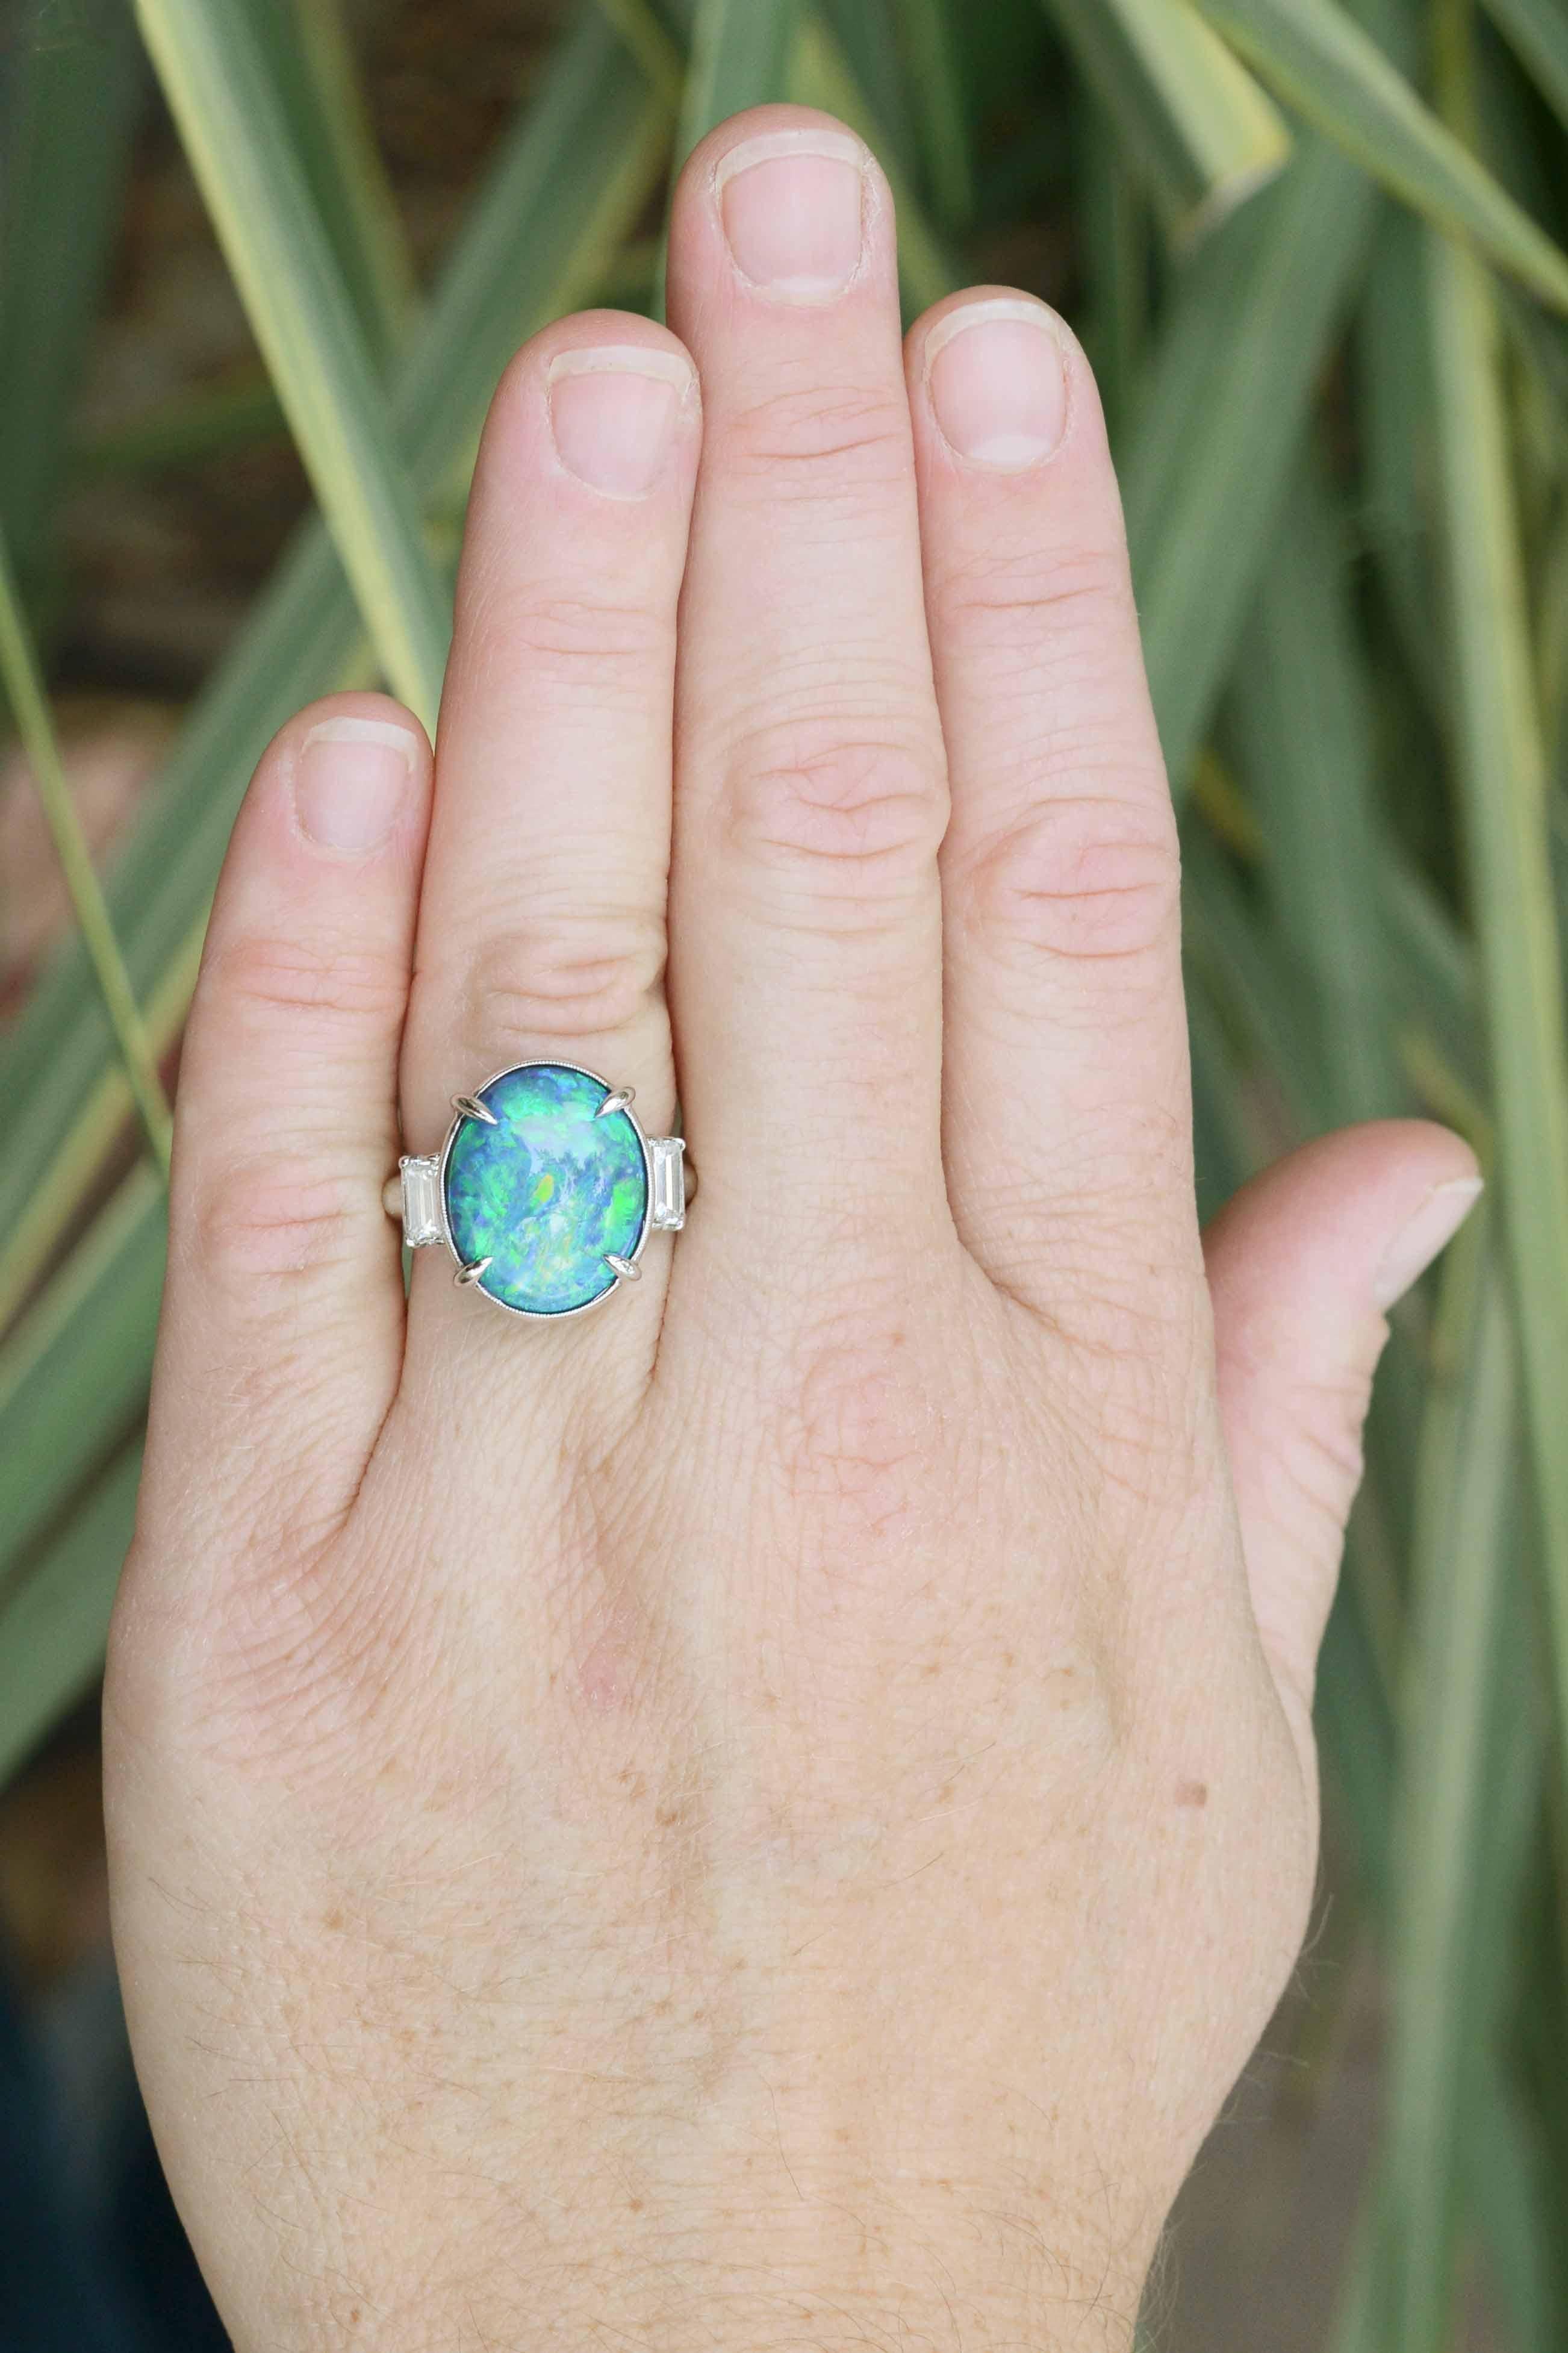 A vintage heirloom, this Art Deco black opal engagement ring is a most mesmerizing natural gemstone. Opals from Lightning Ridge, Australia are among the rarest and most beautiful gemstones. Centered by an over 9 carat oval with incredible rolling